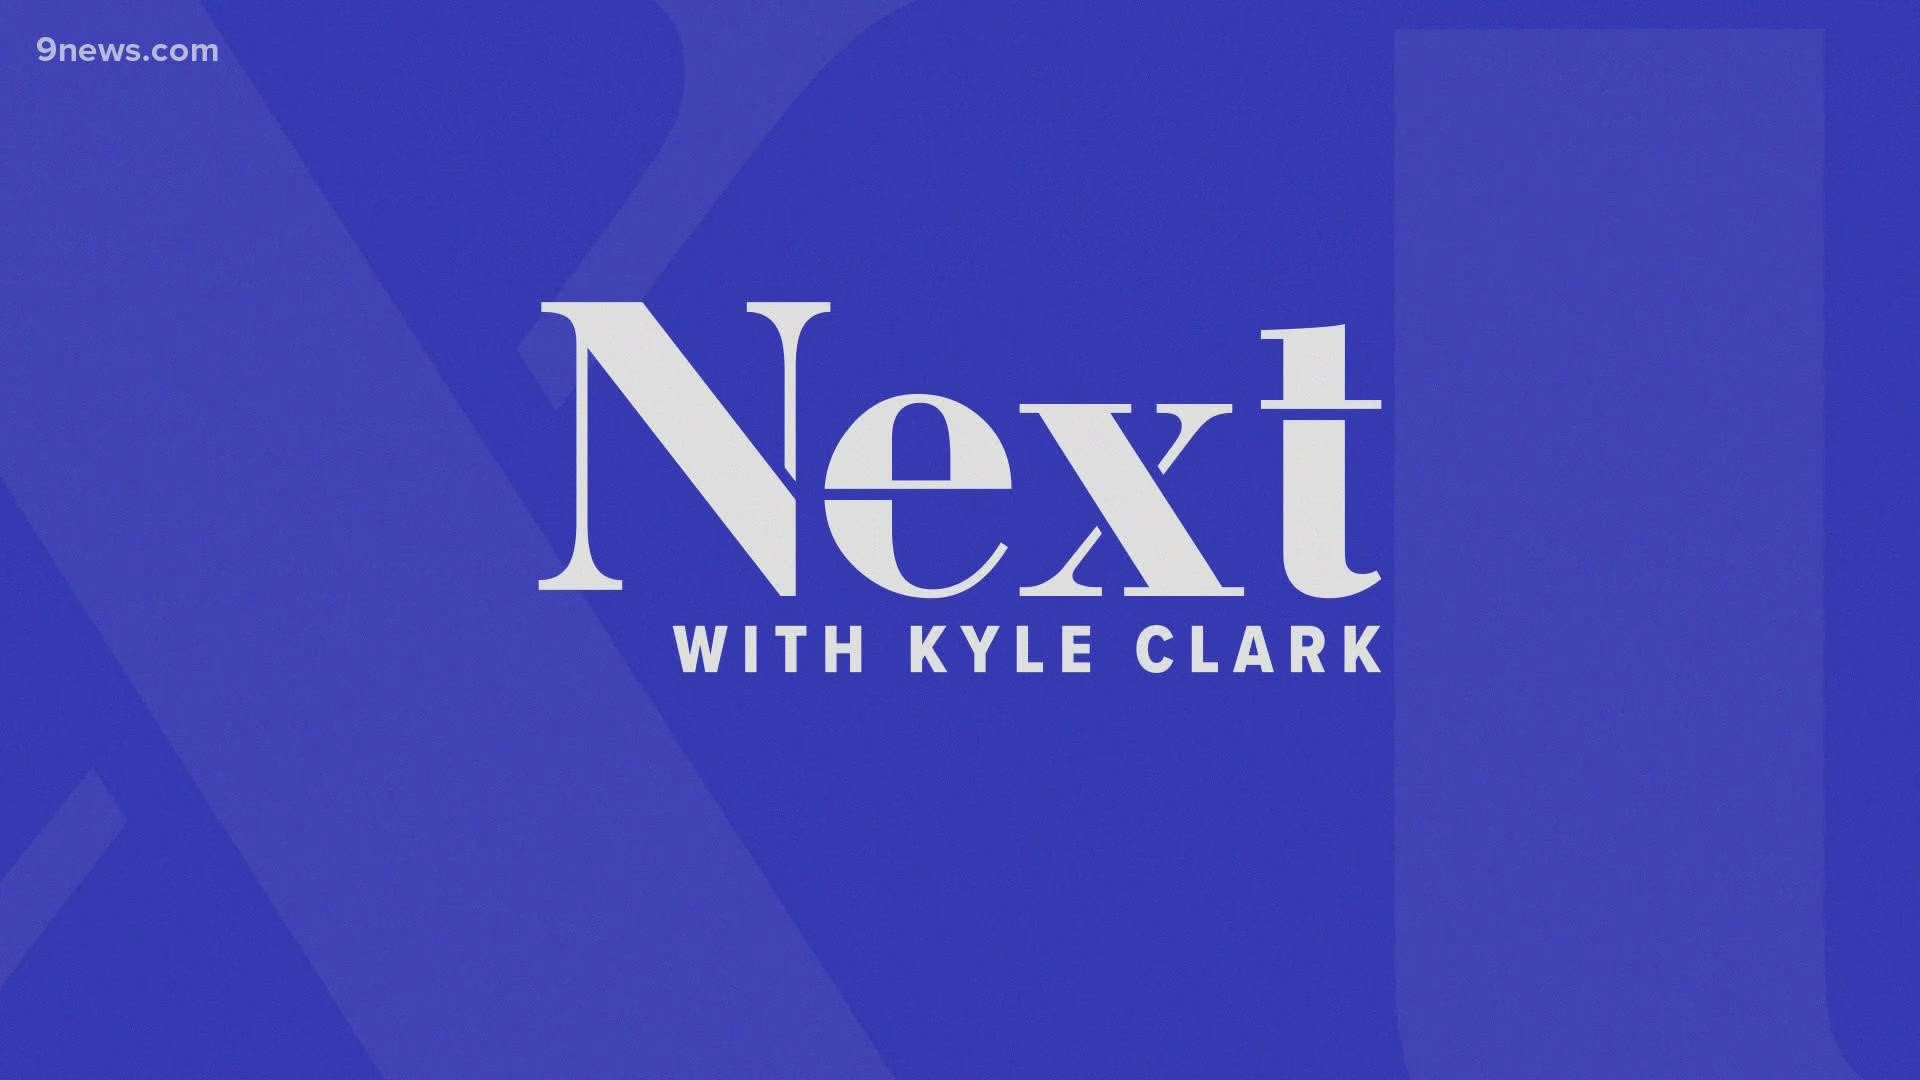 In this special edition of Next with Kyle Clark, we look back at what made us thankful this year, and what we can look forward to Next year.